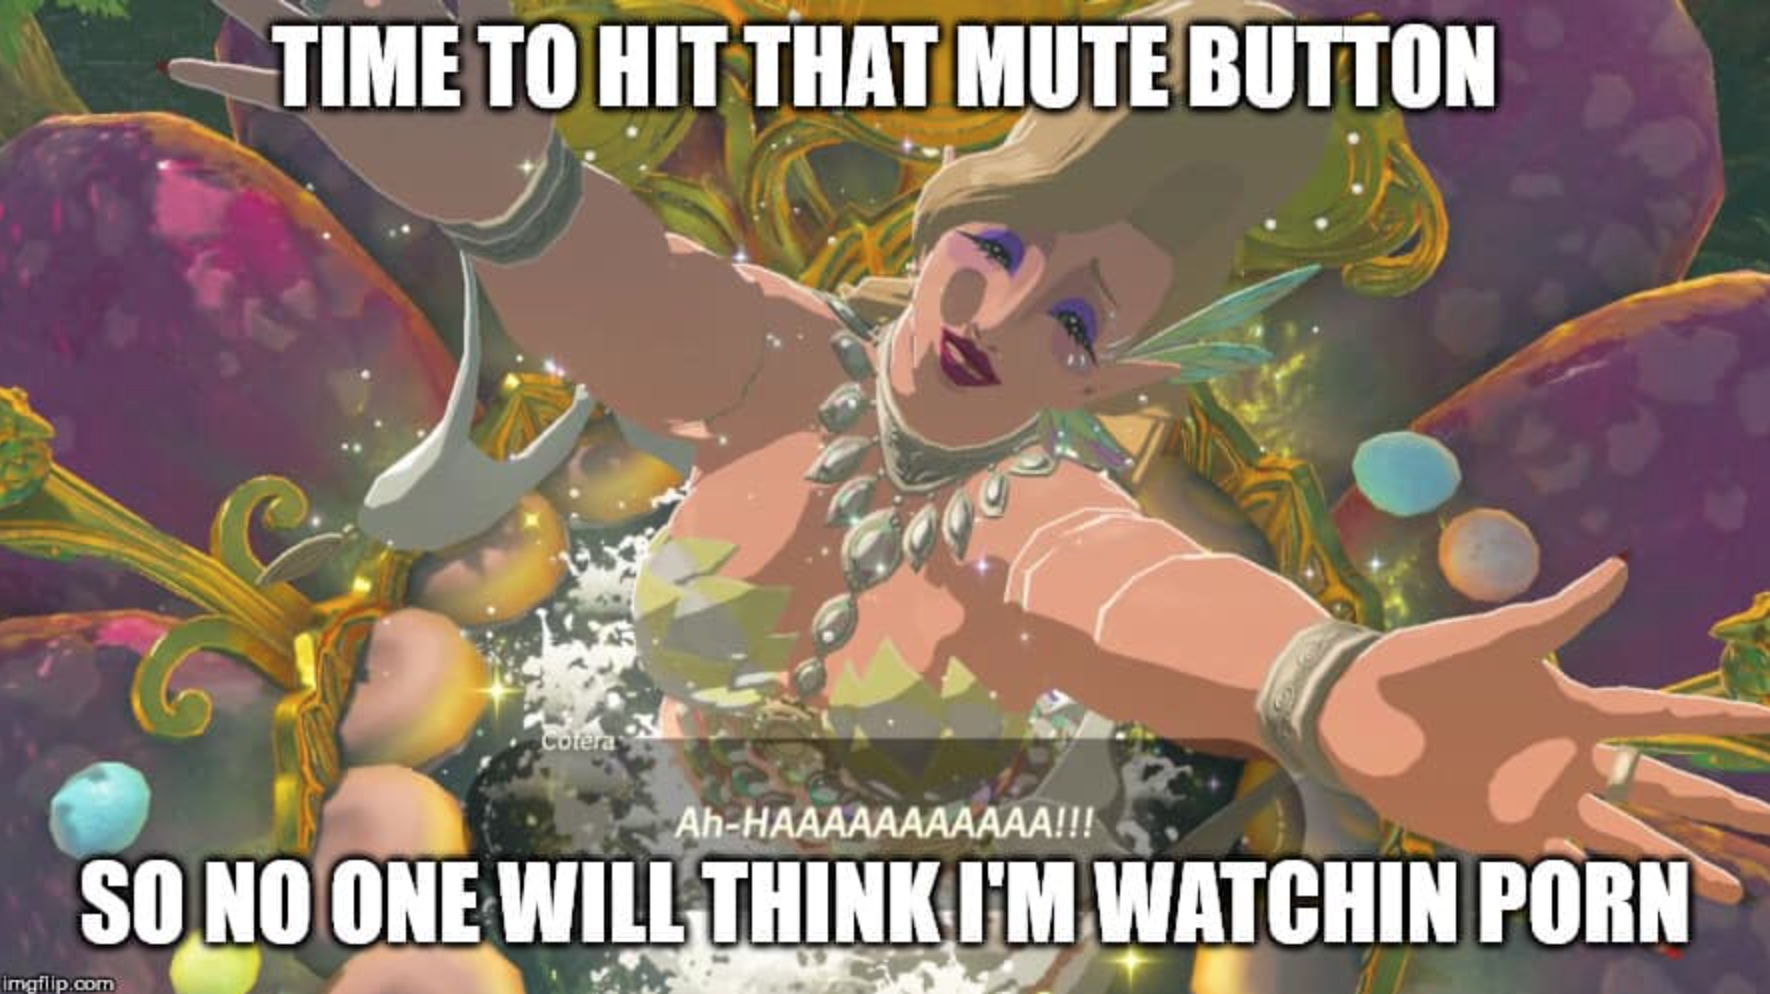 hilarious meme - Time To Hit That Mute Button colora AhHaaaaaaaaaaa!!! So No One Will Think I'M Watchin Porn imgp.